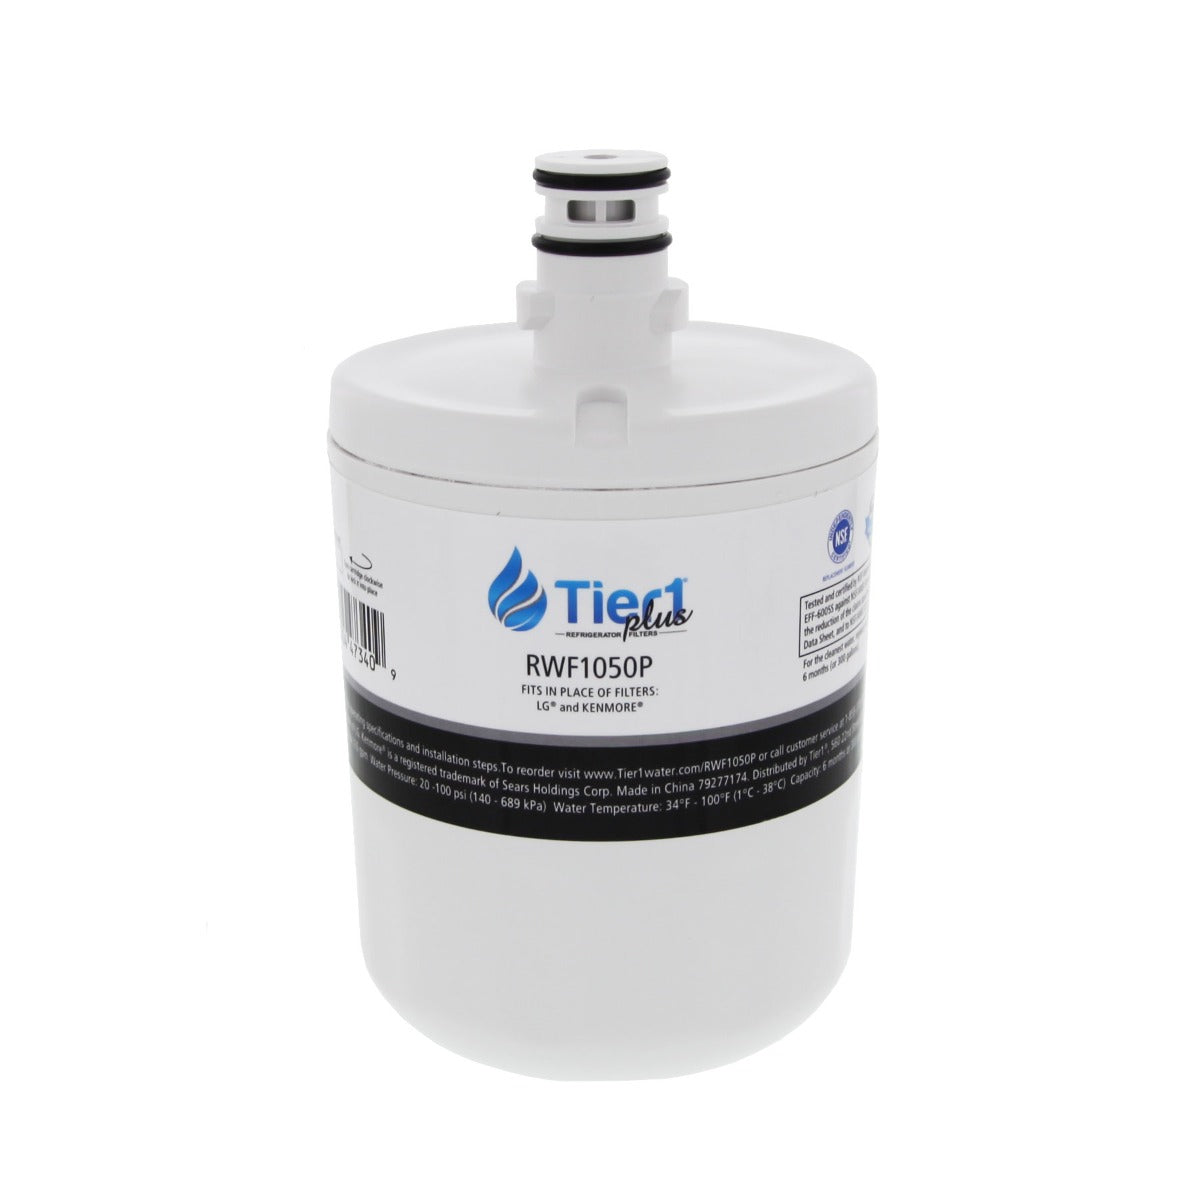 Tier1 Plus LG 5231JA2002A / LT500P Comparable Lead And Mercury Reducing Refrigerator Water Filter